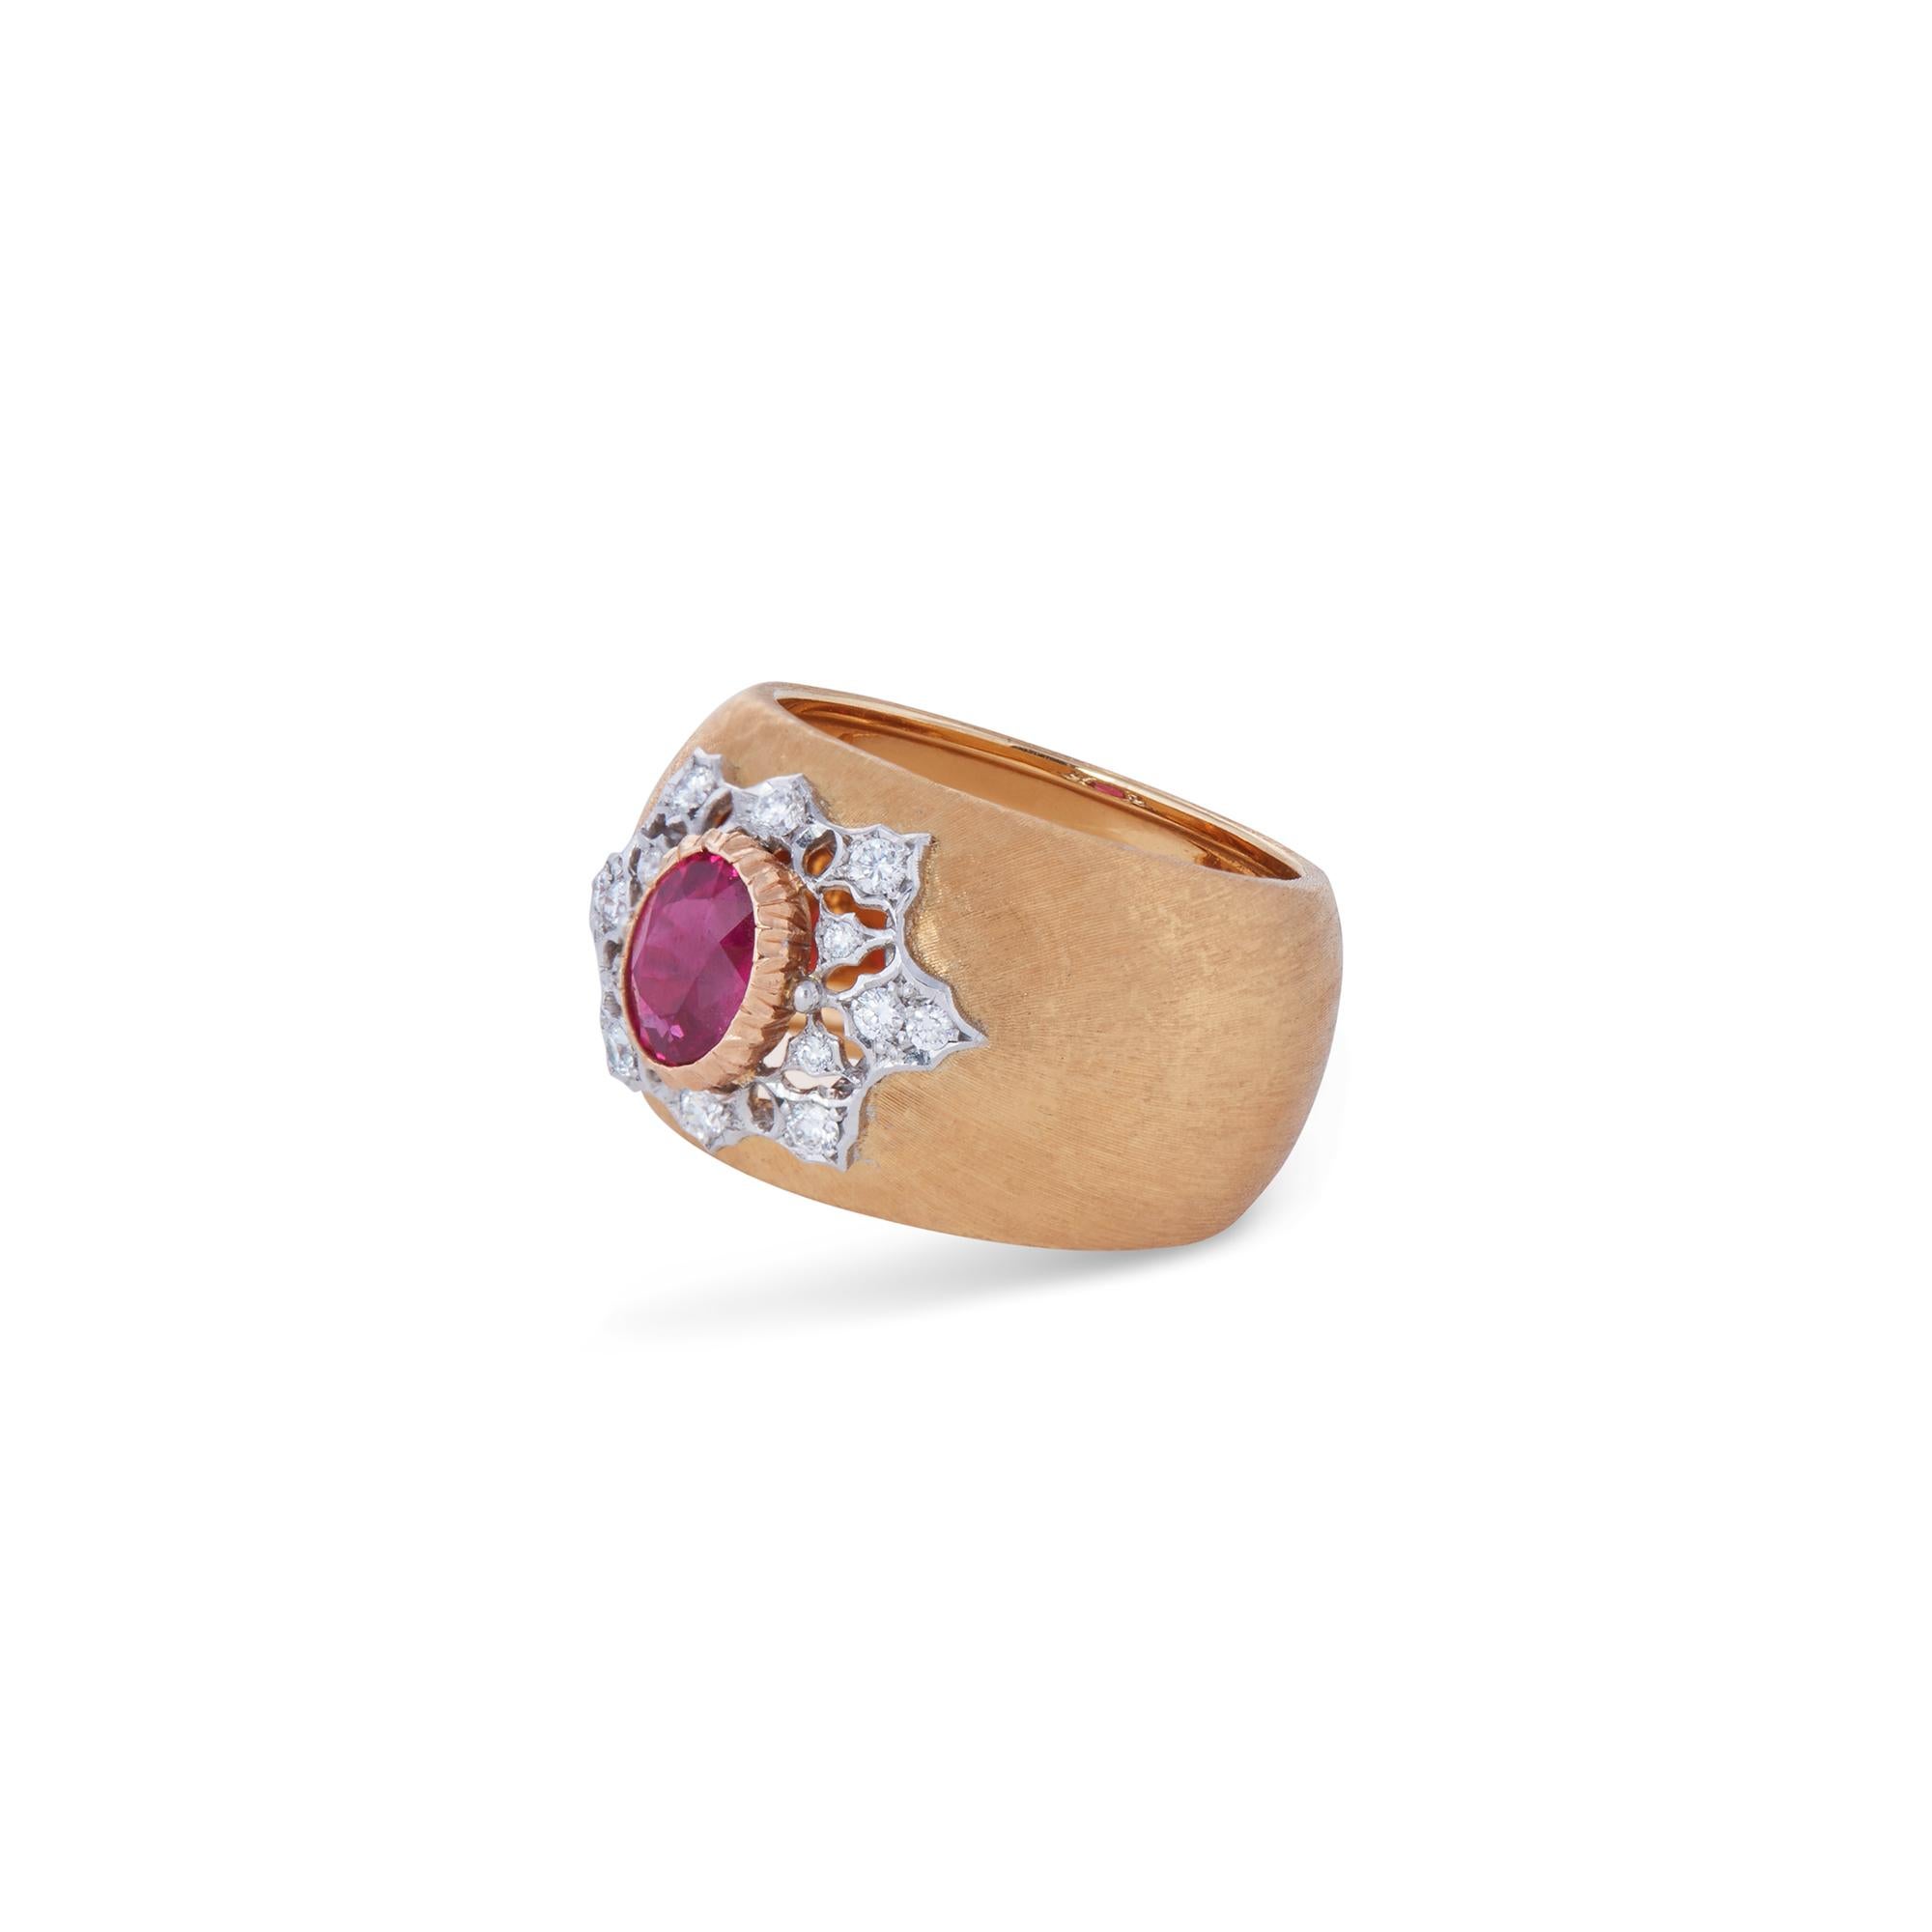 Authentic Buccellati premium band ring crafted in 18 karat brushed gold.  The ring features a captivating 1.05 carat oval faceted bezel set Burma ruby at the center surrounded by 0.21 carats of round brilliant cut diamonds set in an intricate white